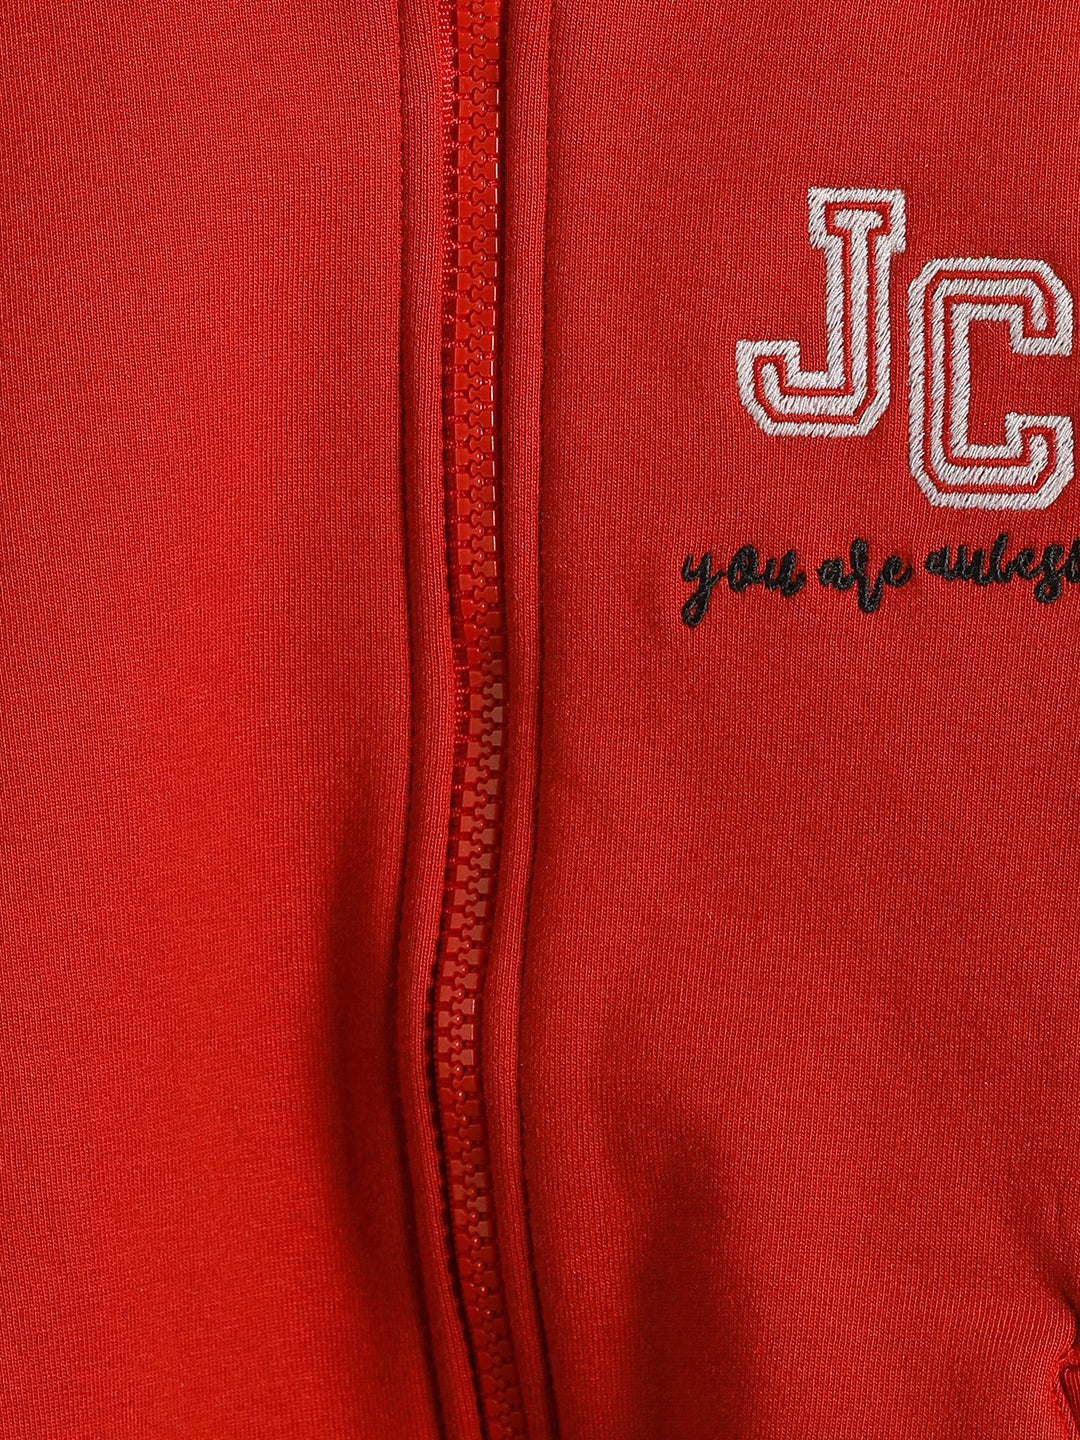 Girls JC You are Awesome With Zipper Hoodie Jacket - Red